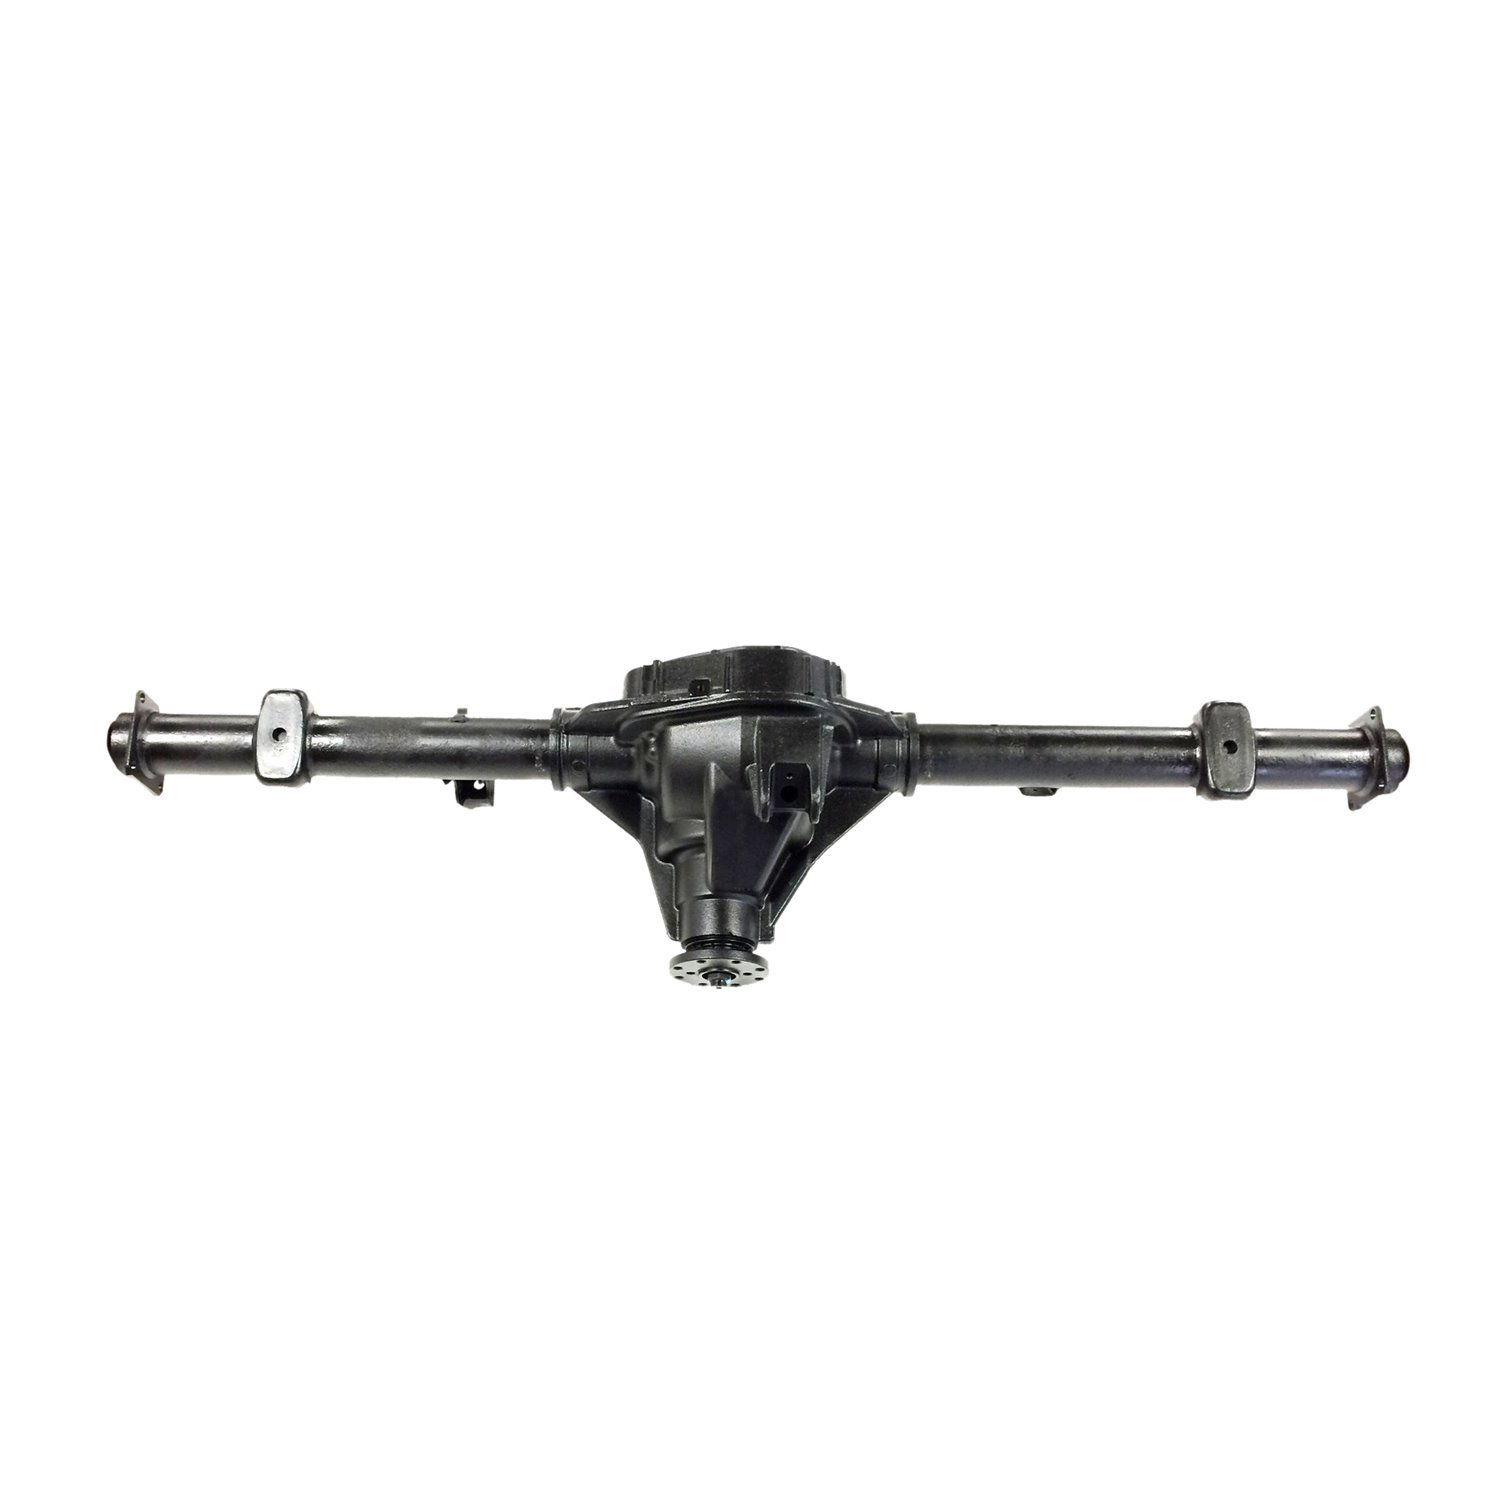 Remanufactured Complete Axle Assembly for Ford 9.75" 09-11 Ford F150 3.73 Ratio, 7 Lug